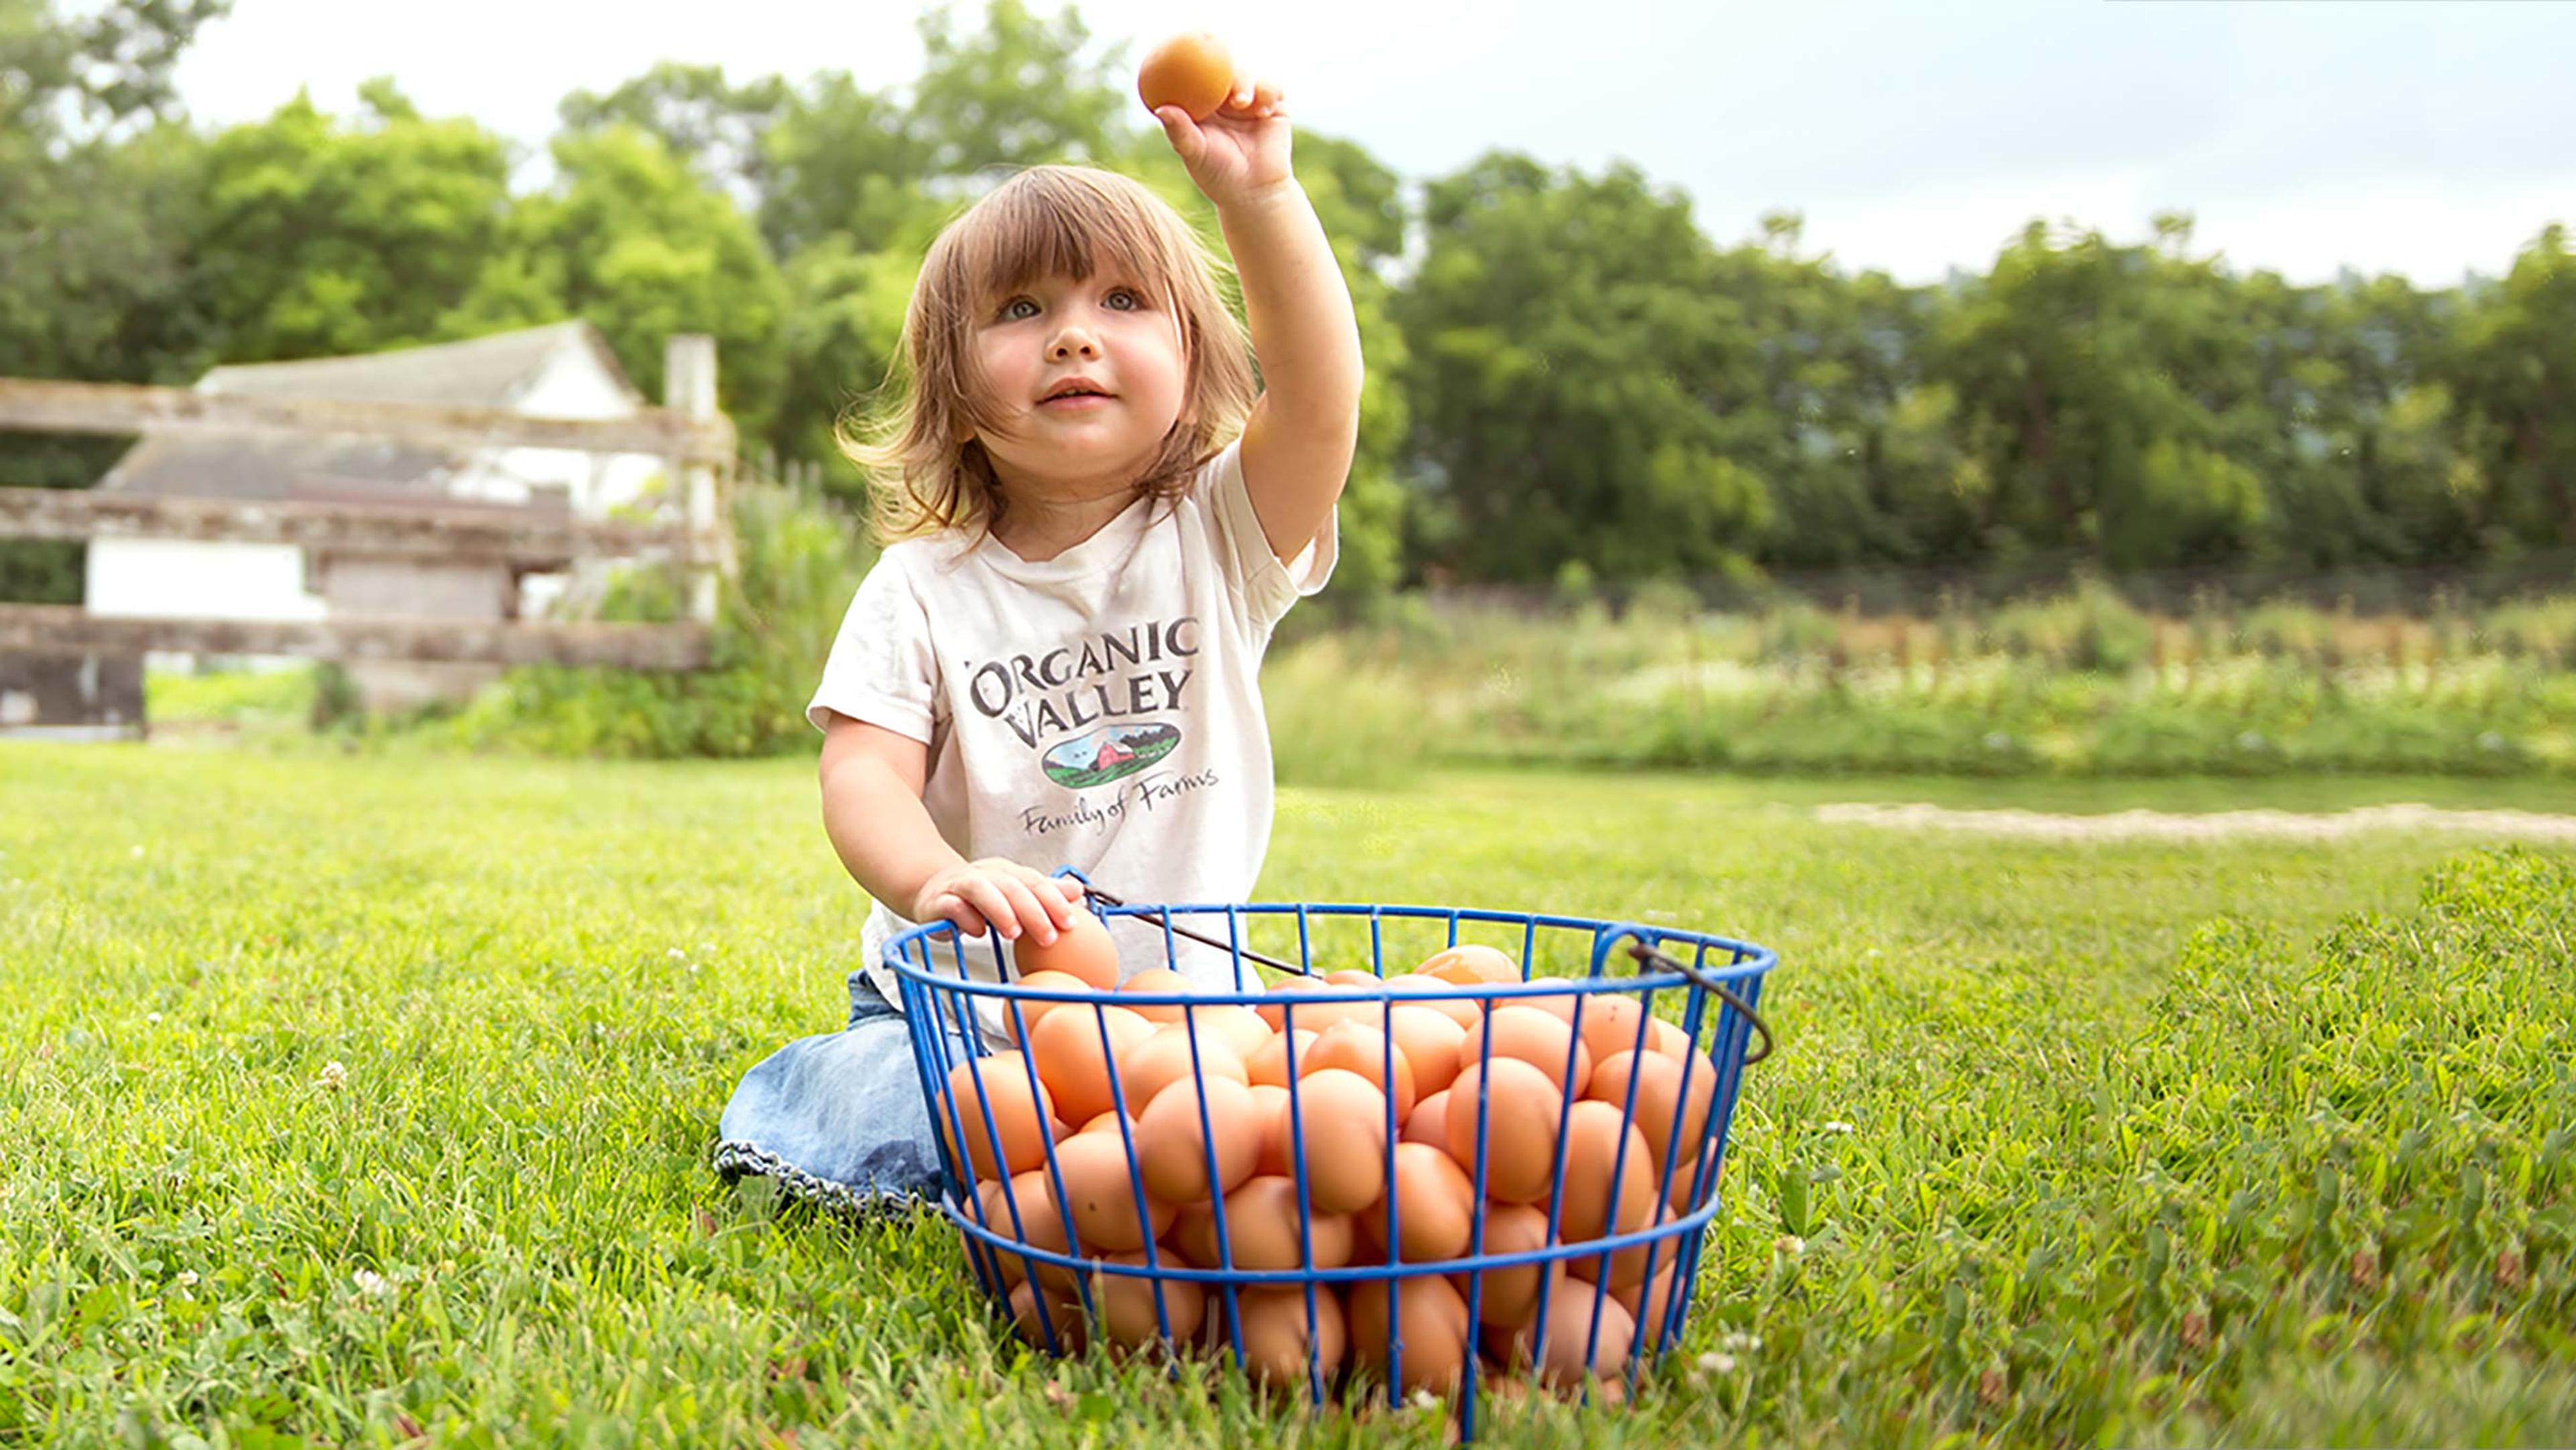 A child sitting in grass holding up an egg from a basket of eggs.